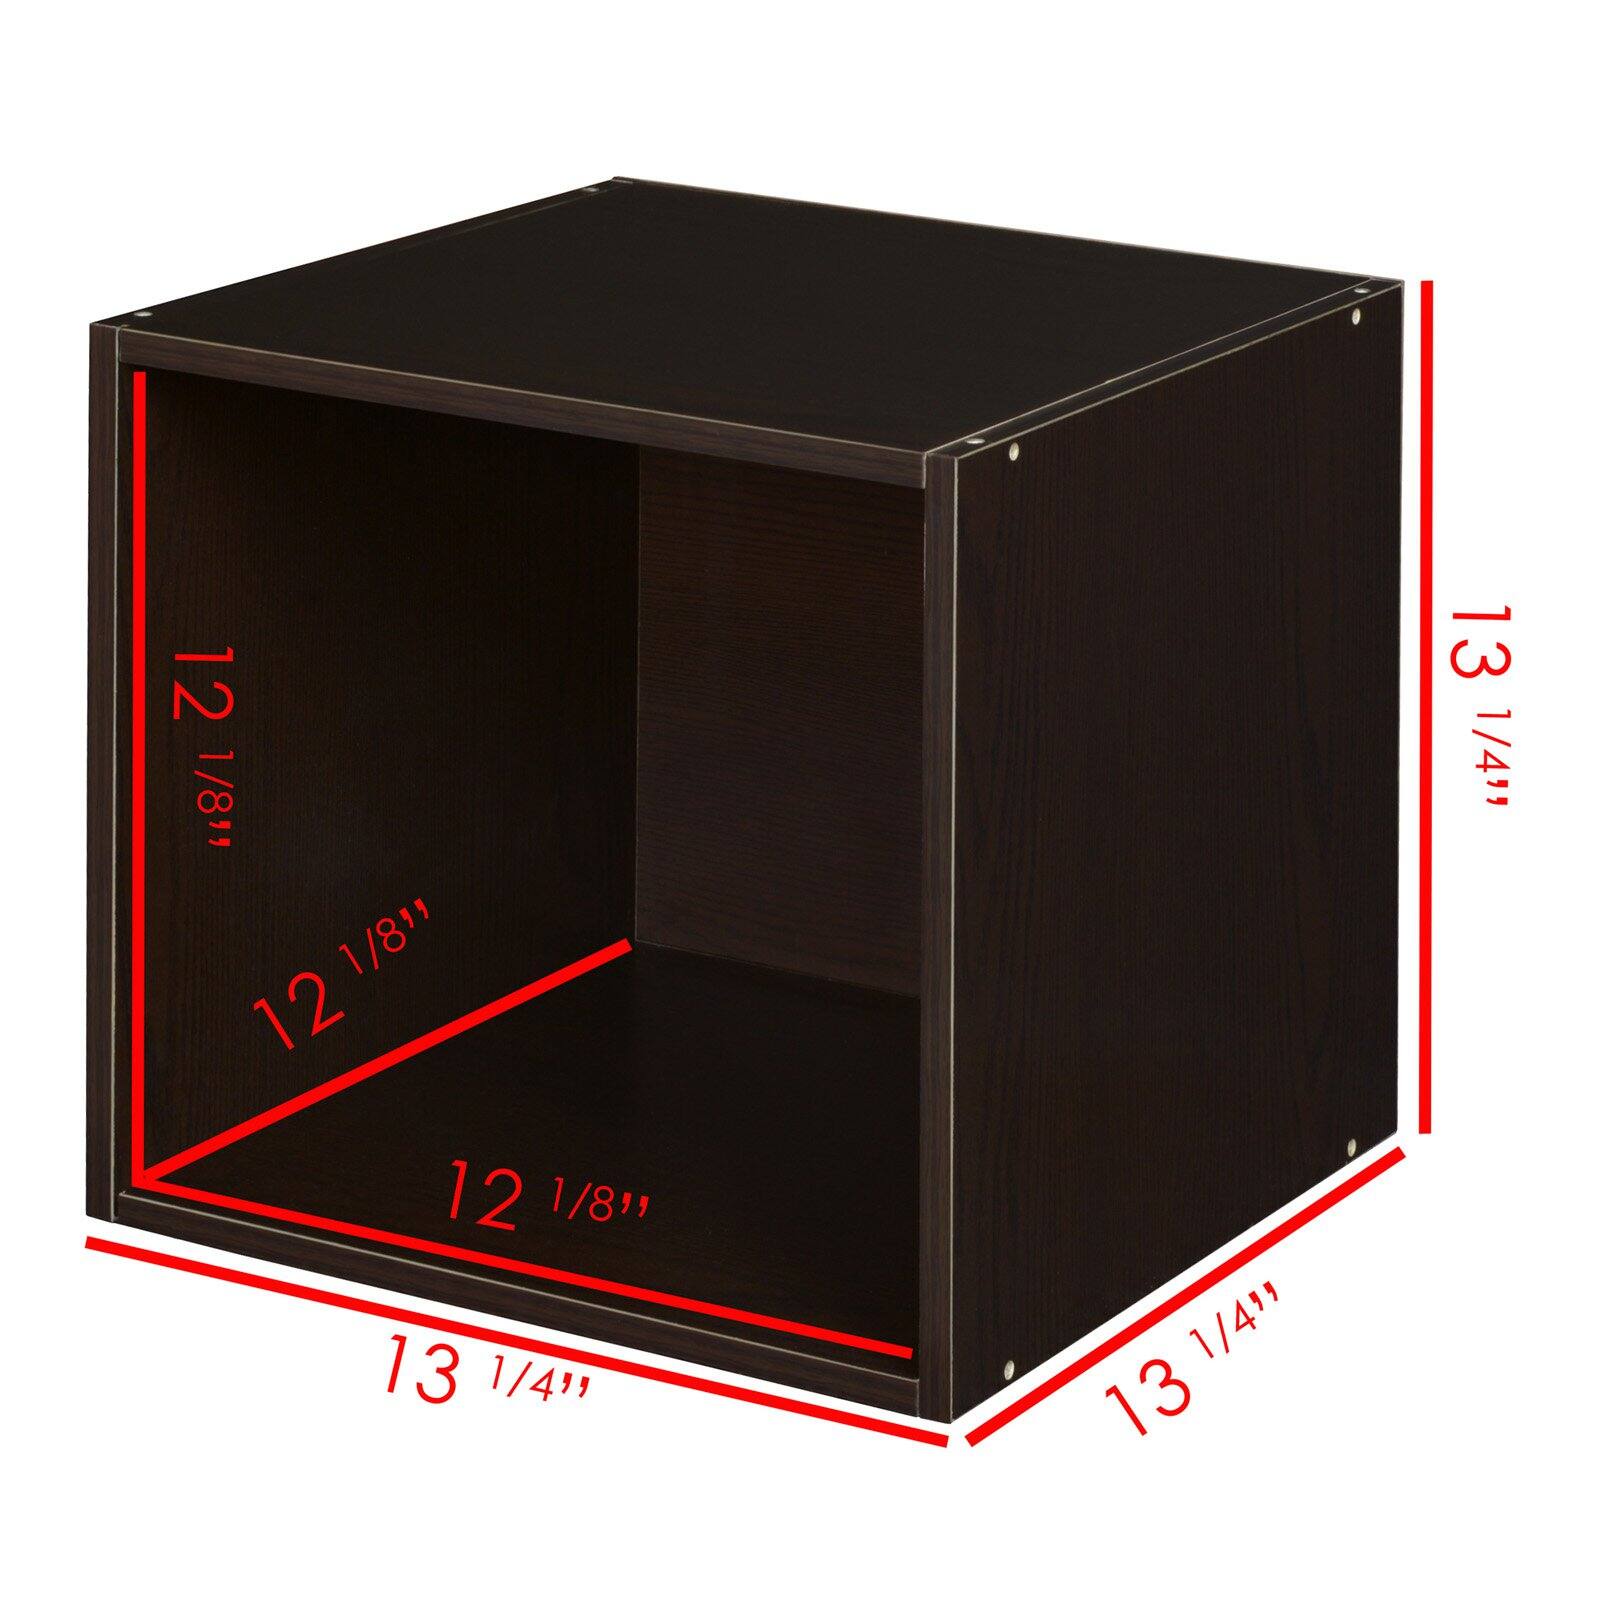 Niche Cubo Storage Set- 8 Full Cubes/4 Half Cubes with Foldable Storage Bins- Truffle/Pink - image 3 of 8